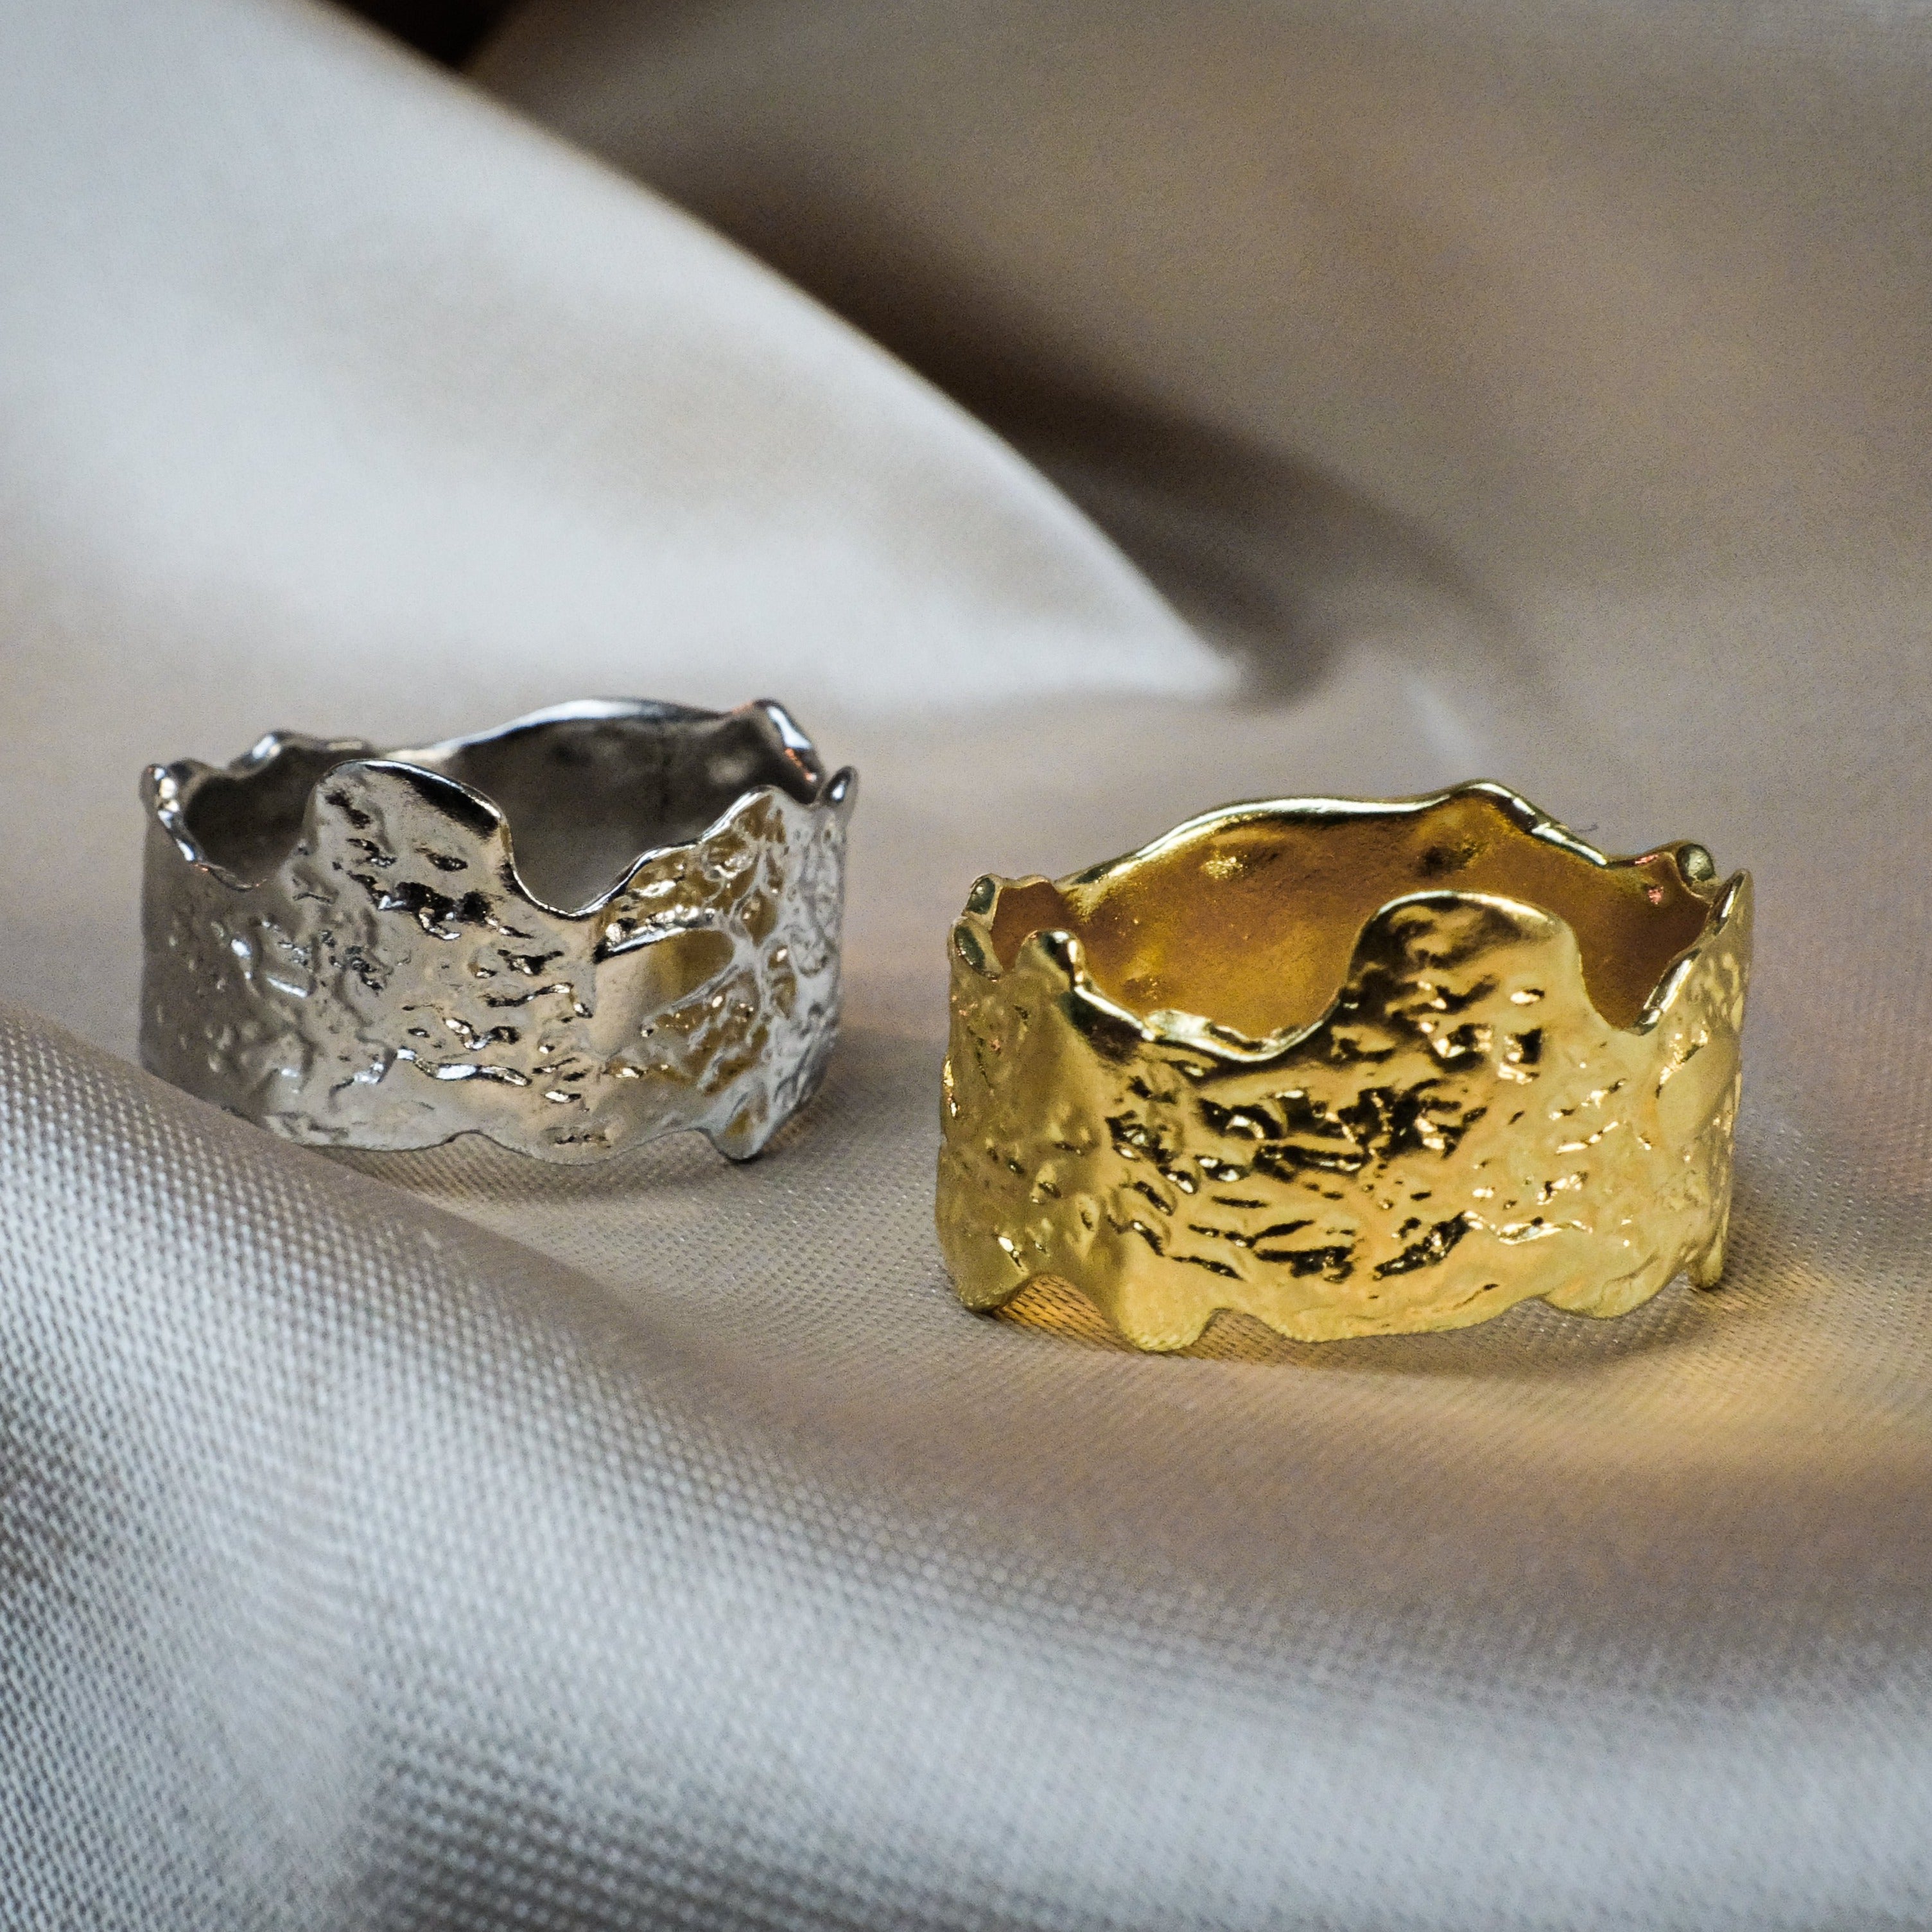 Lava Ring - Solid Gold